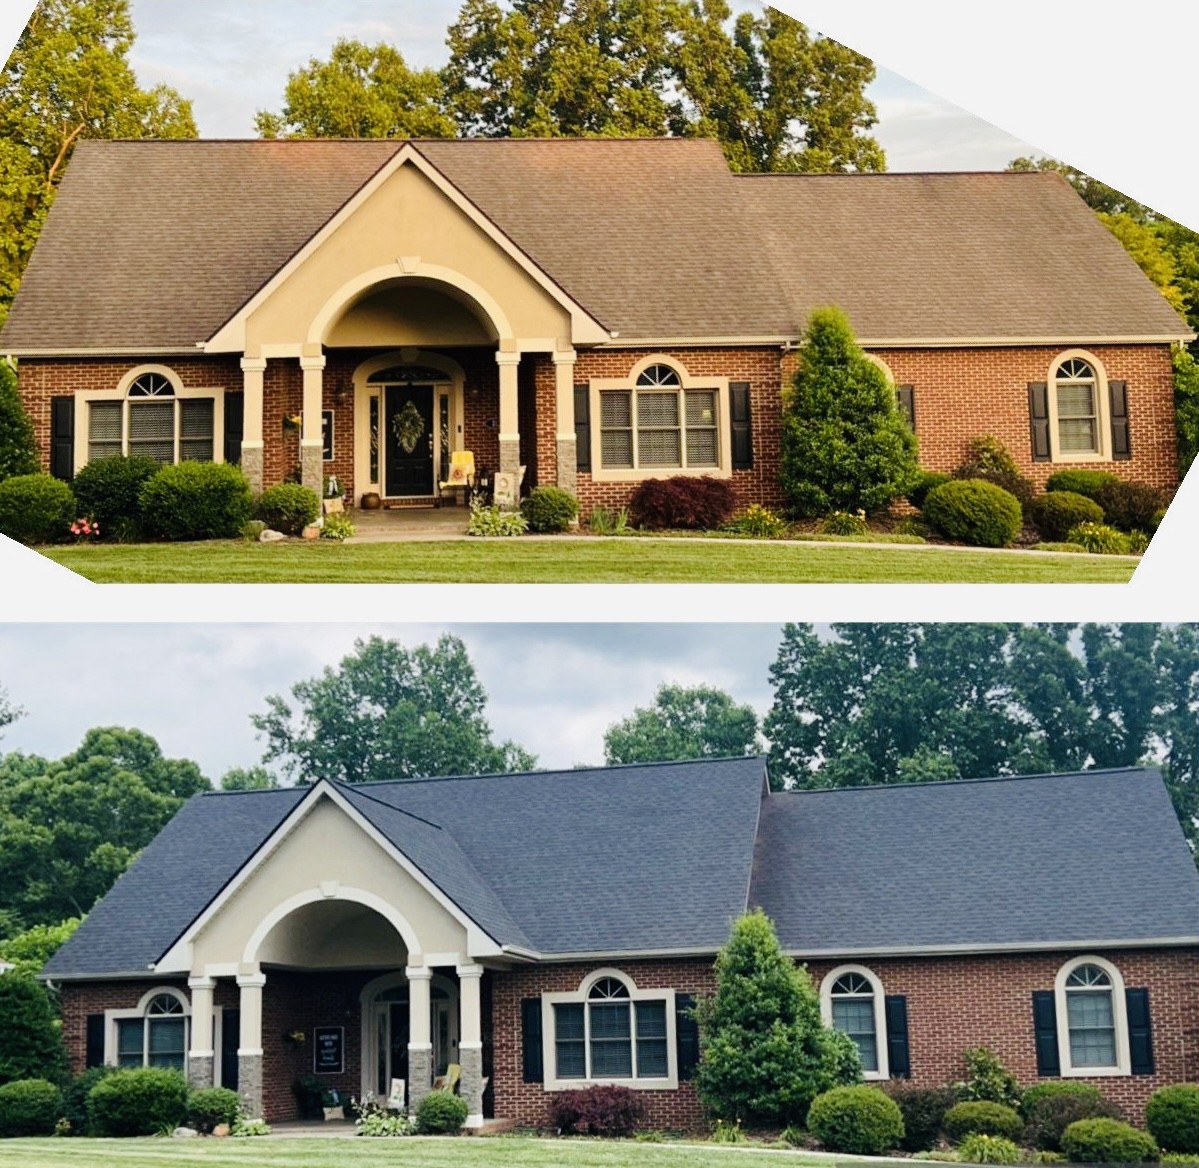 Successful Collaboration with Homeowners Insurance for Roof Replacement in Elizabethton, TN.